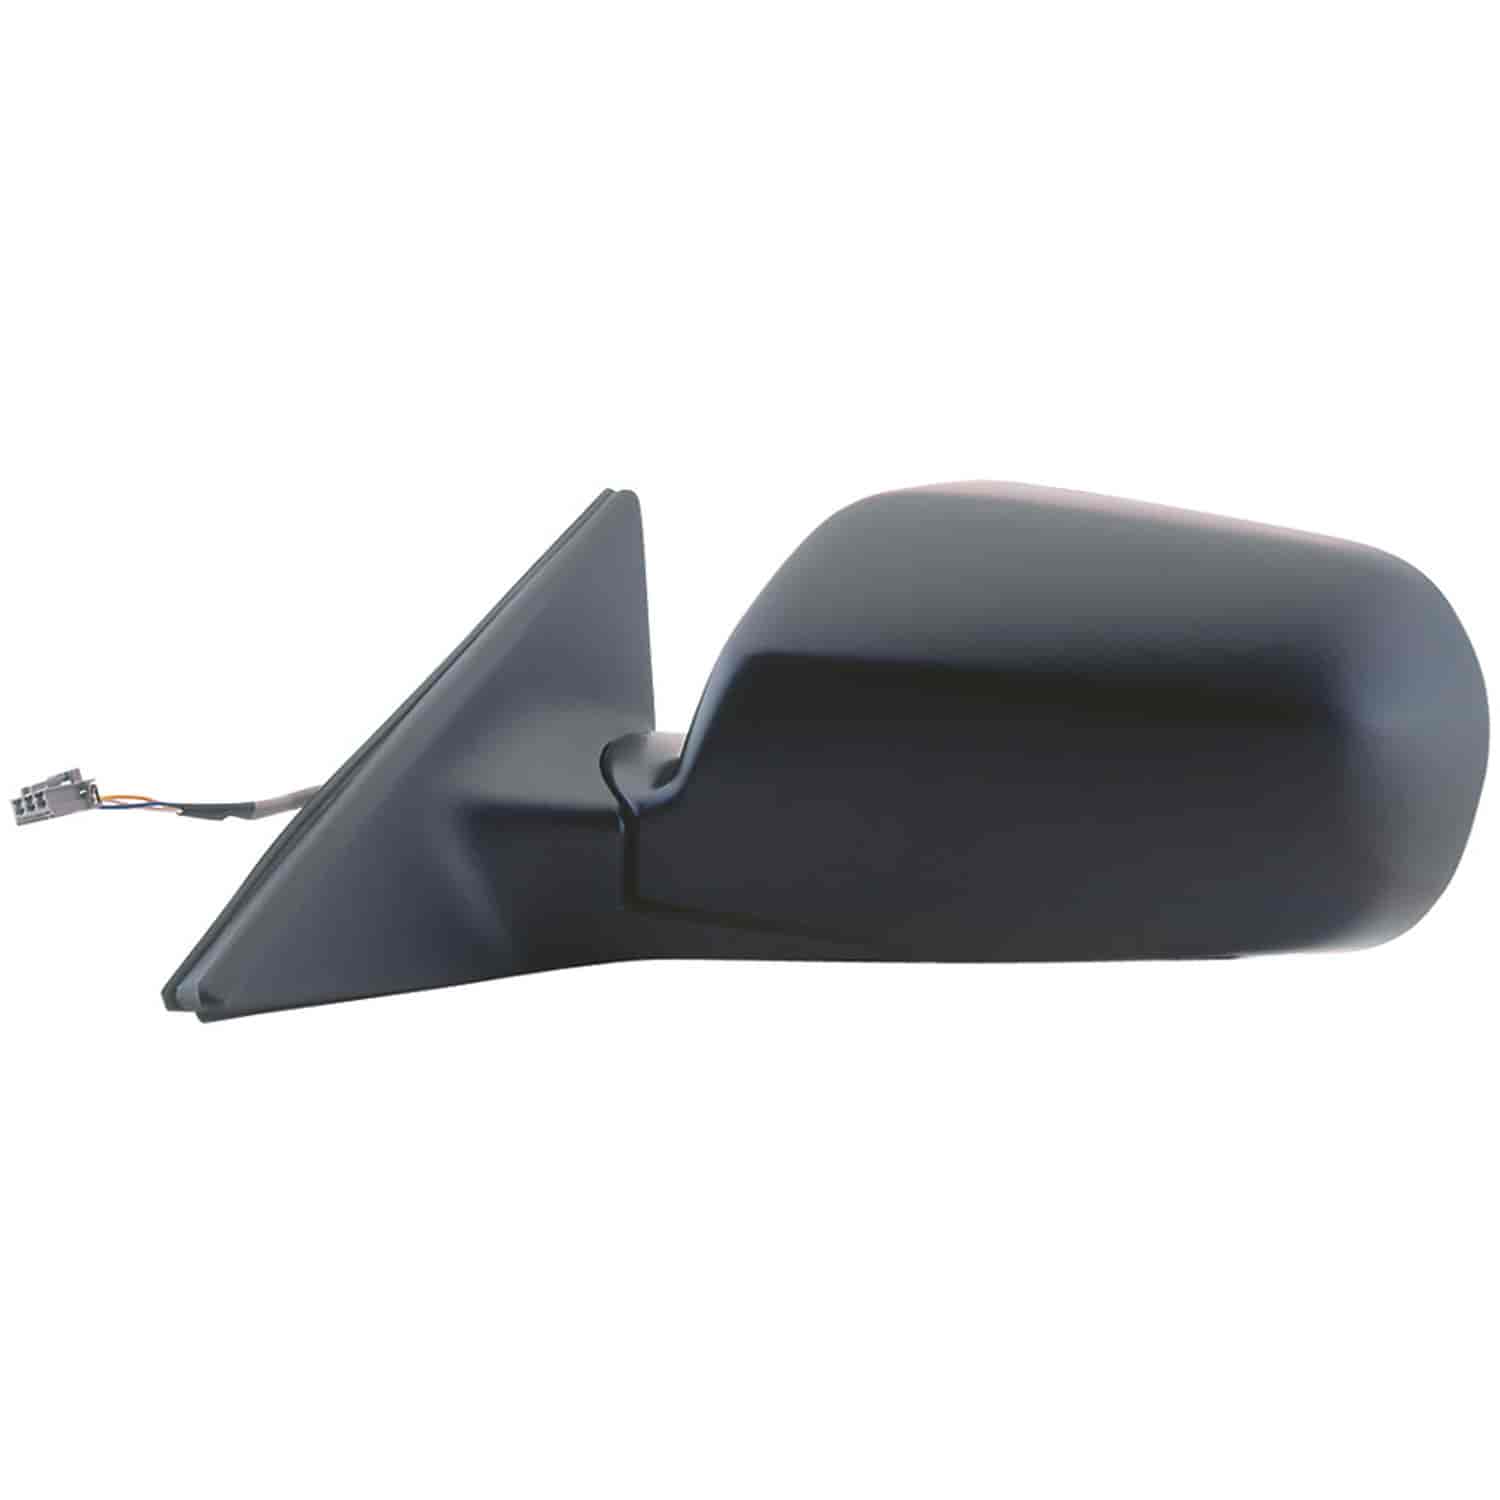 OEM Style Replacement mirror for 99-02 Honda Accord Coupe driver side mirror tested to fit and funct